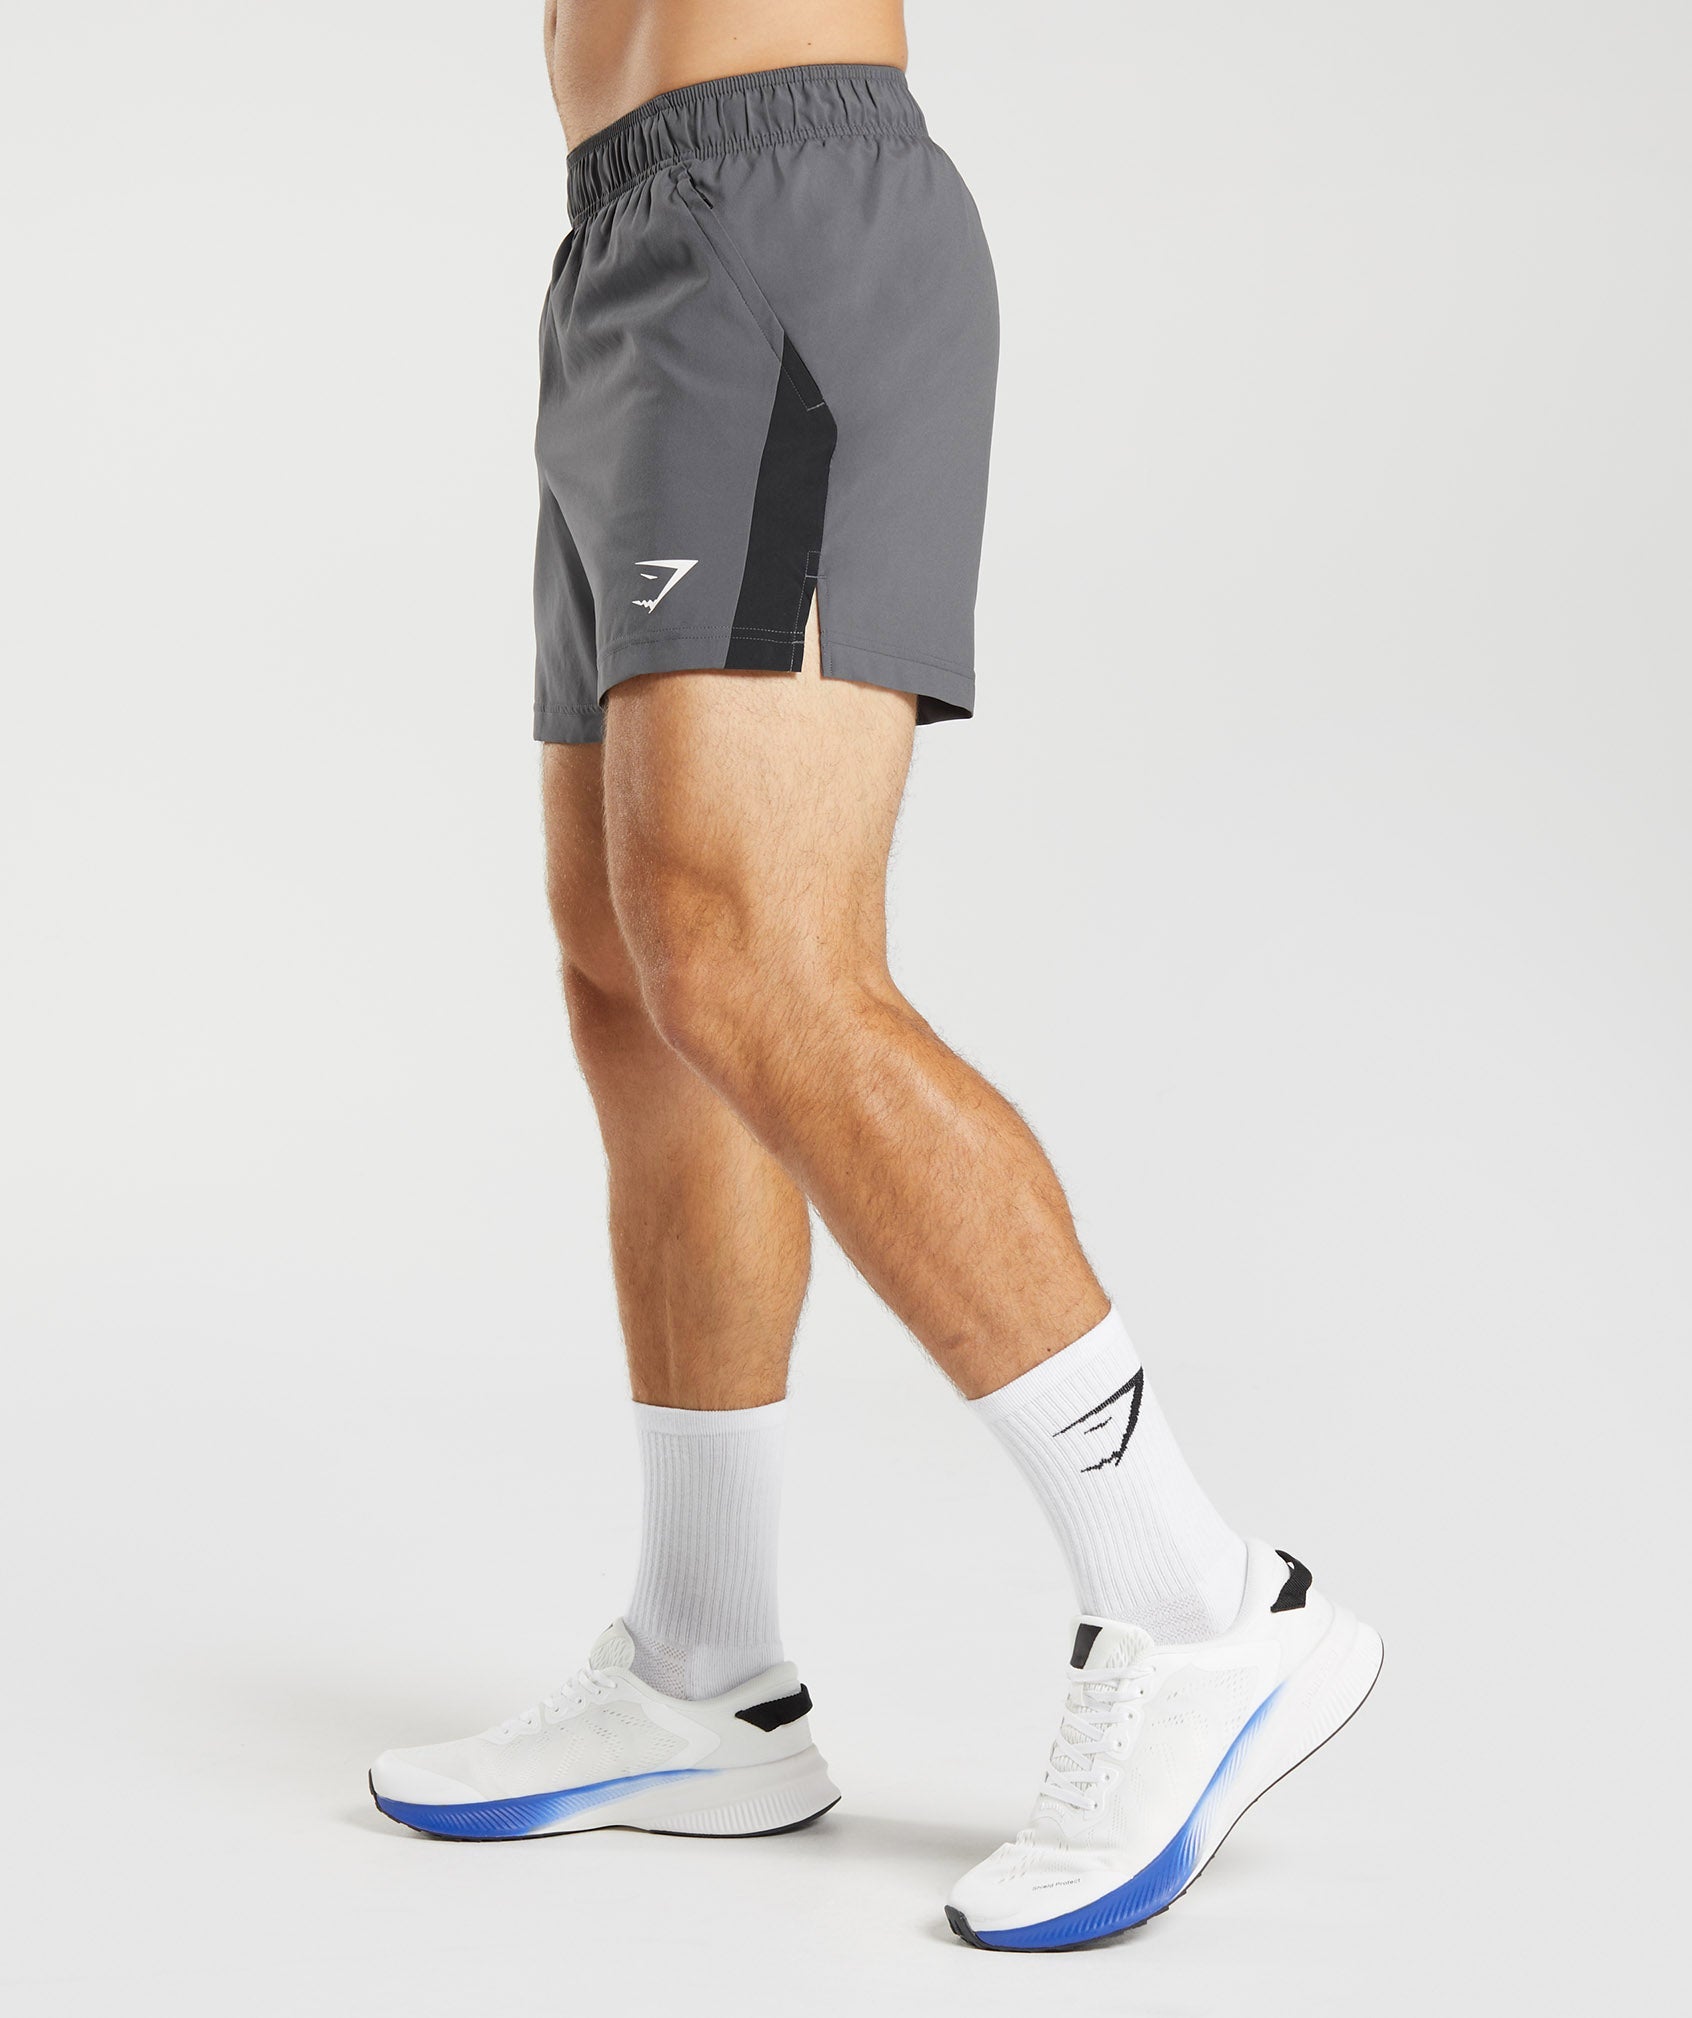 Sport 5" Shorts in Silhouette Grey/Black - view 3